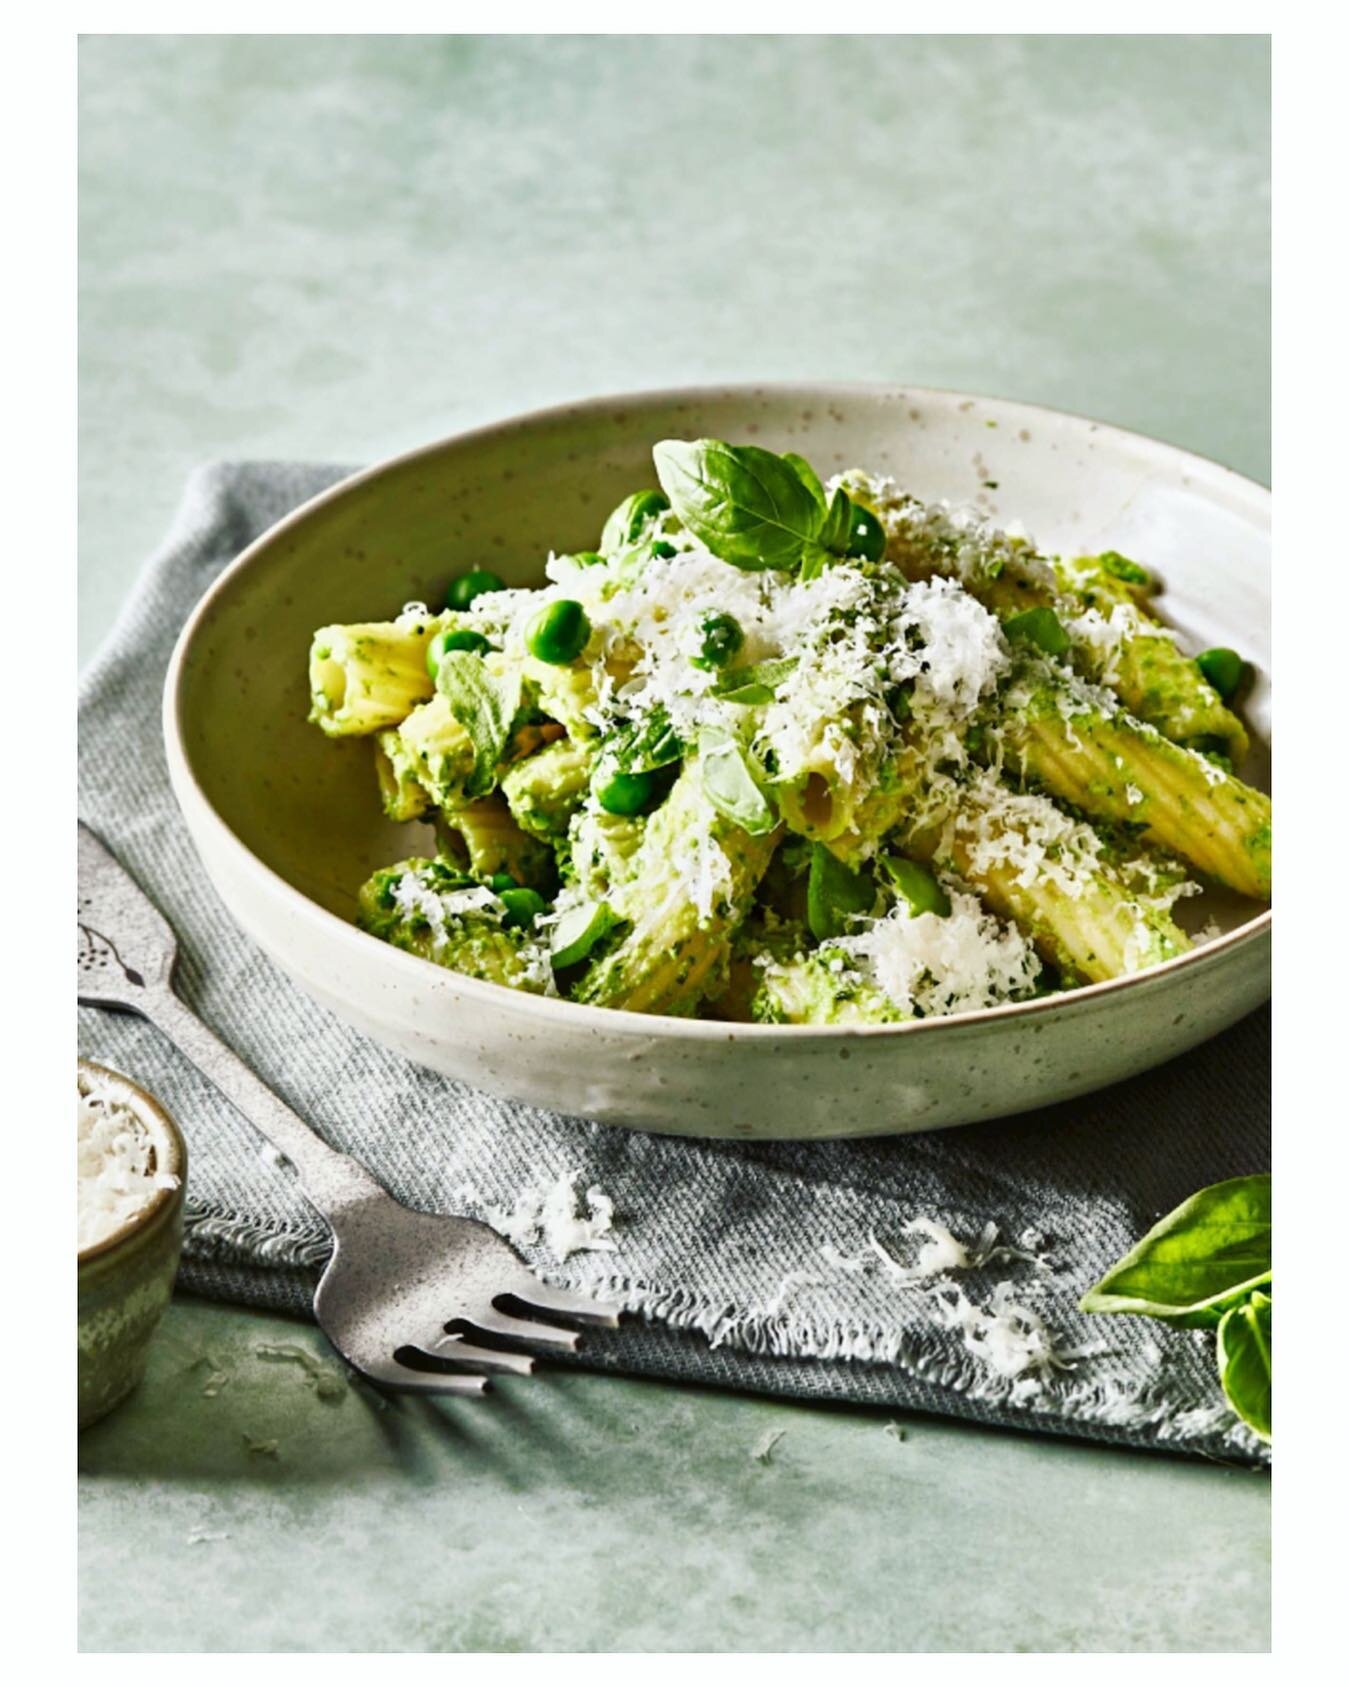 Meet the 4 P&rsquo;s - Pasta, Pesto, Peas &amp; Parmesan 😍 Delightfully easy to make recipe by @chef_jeffers_ using @dale_farm cream. Recipe on the Dale farm grid, that&rsquo;s dinner sorted 🙌

#midweekmeals #whatsfordinner #pasta #pesto